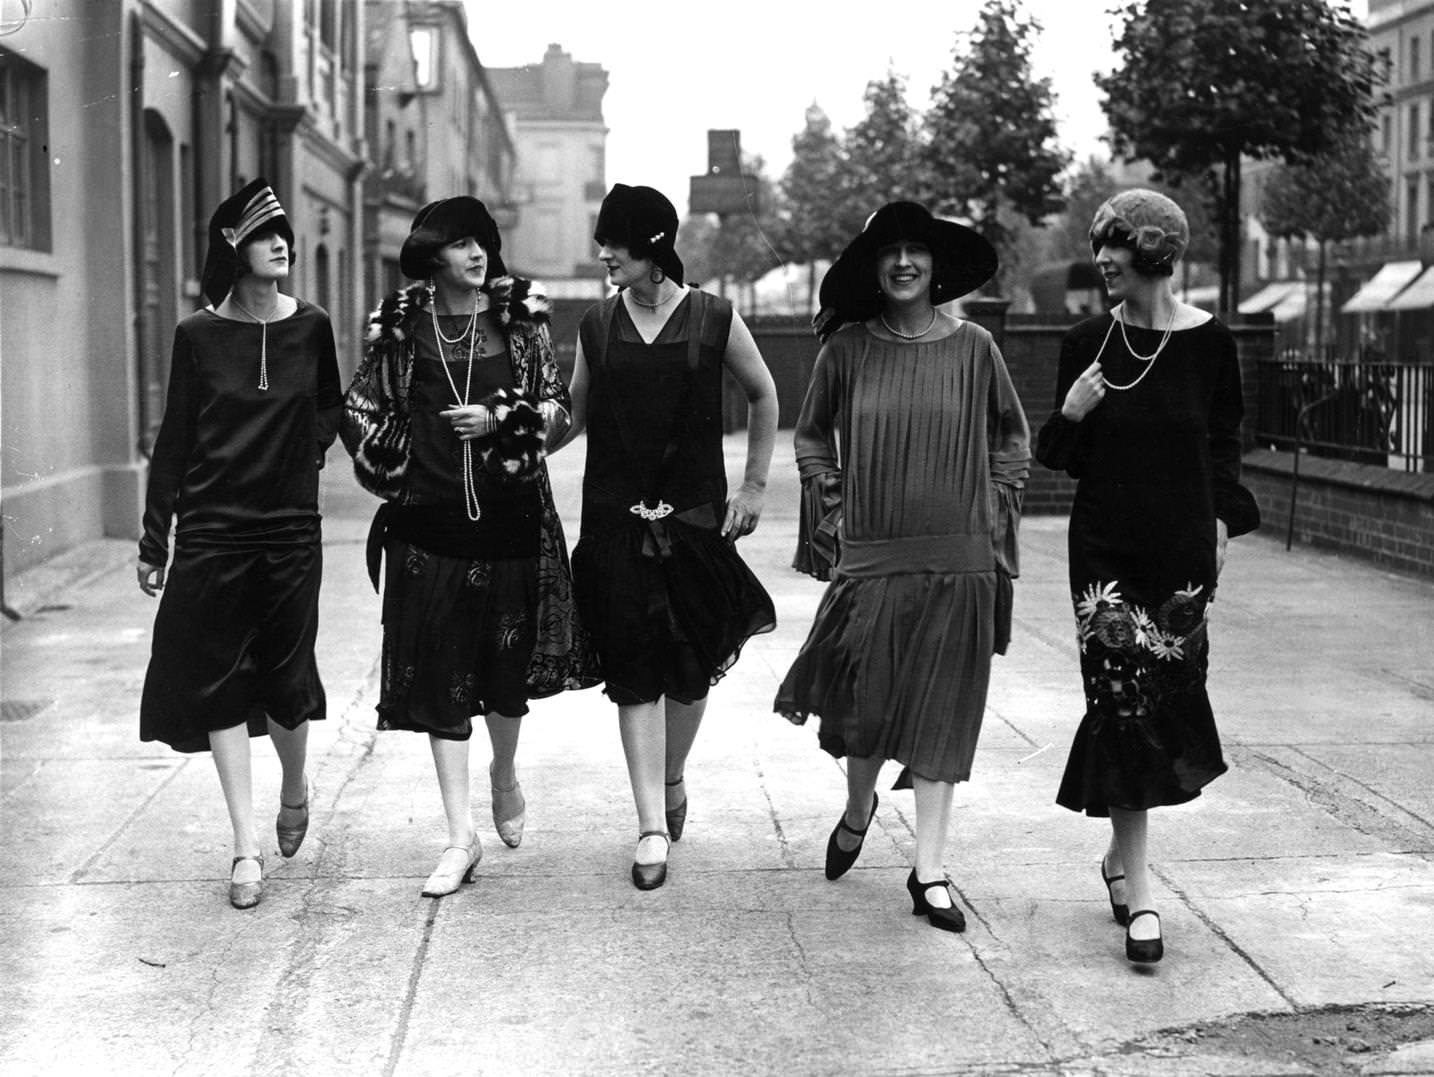 Models outside the fashion exhibition at Holland Park in London wearing comtemporary dropped waist dresses and styles of 25 years ago, 1925